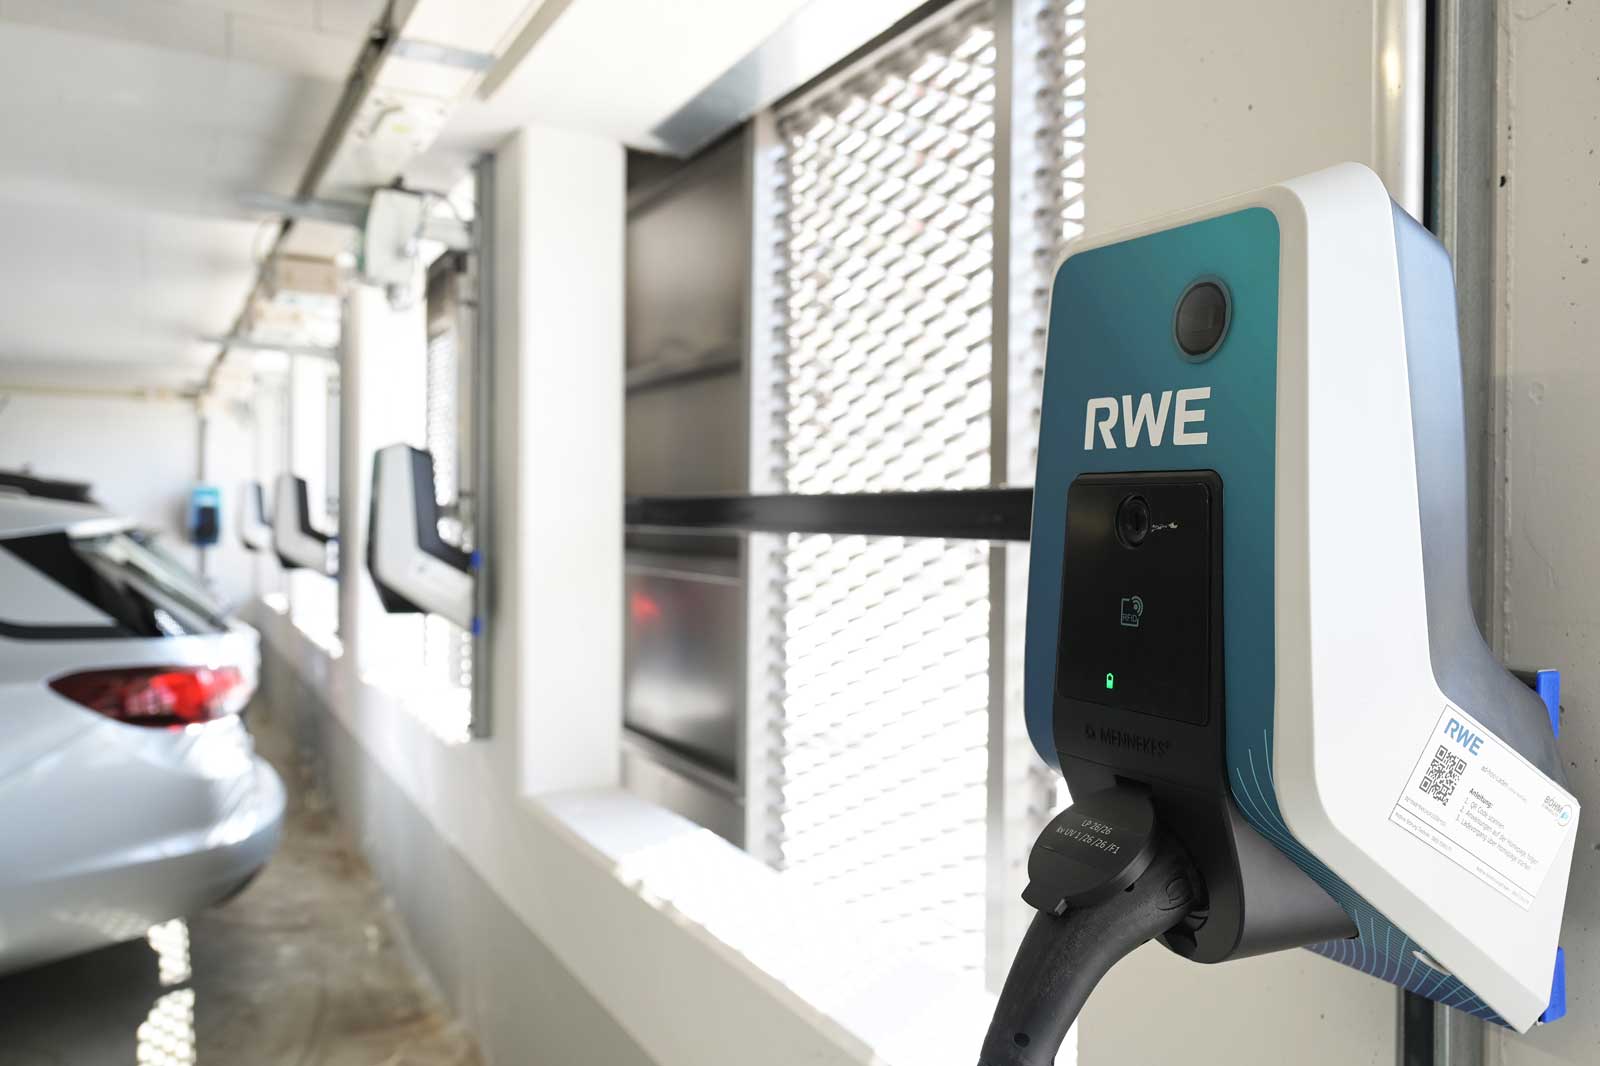 Meets an increased need for electricity | RWE in the Nordics